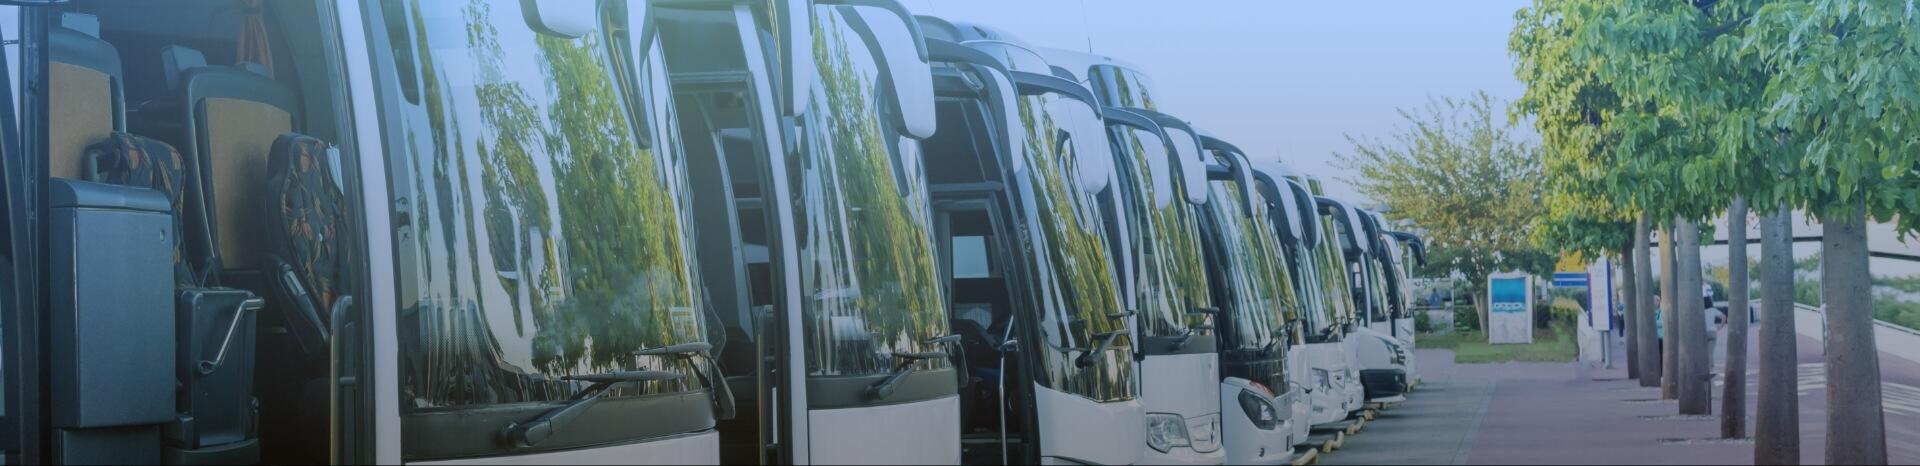 Buses Aligned in Parking Lot